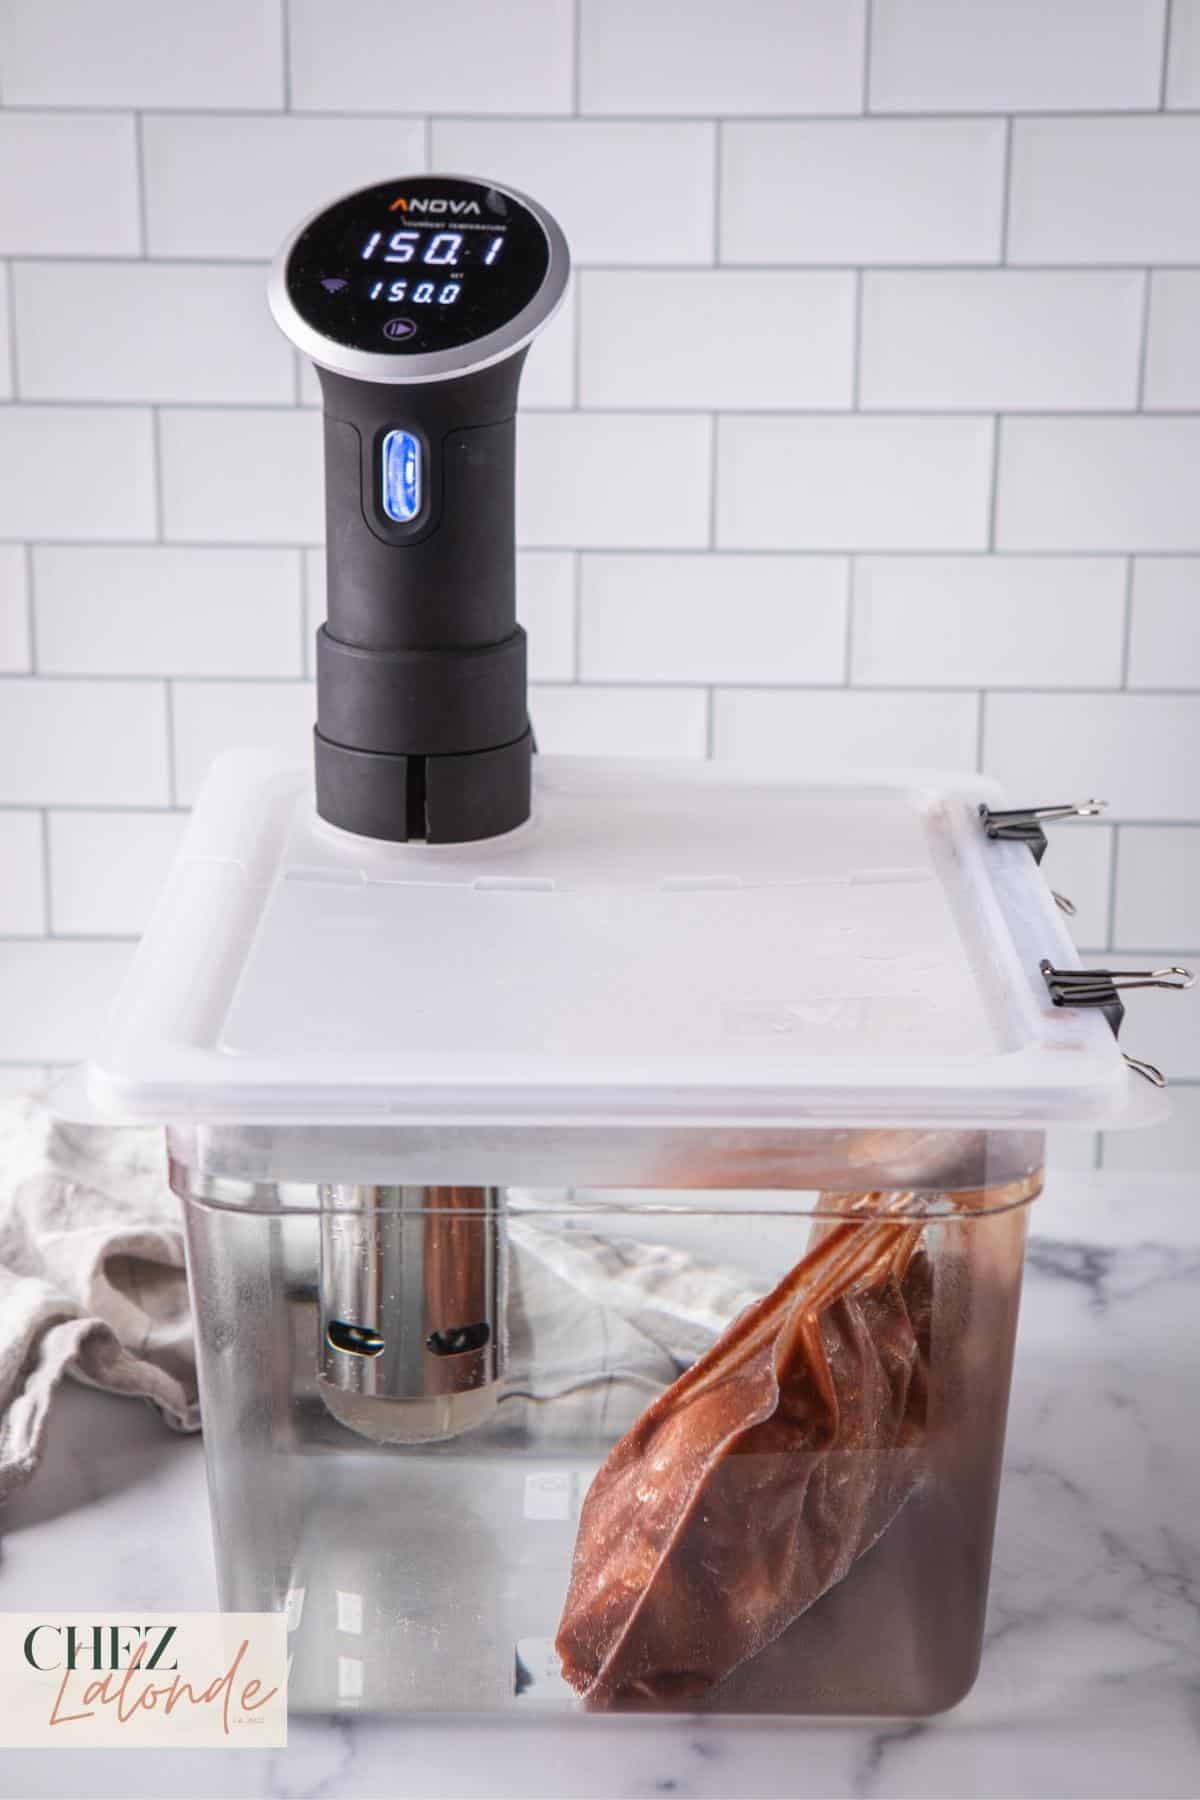 For consistent heat, if you have a similar Sous Vide container, cover it at the top to retain warmth.